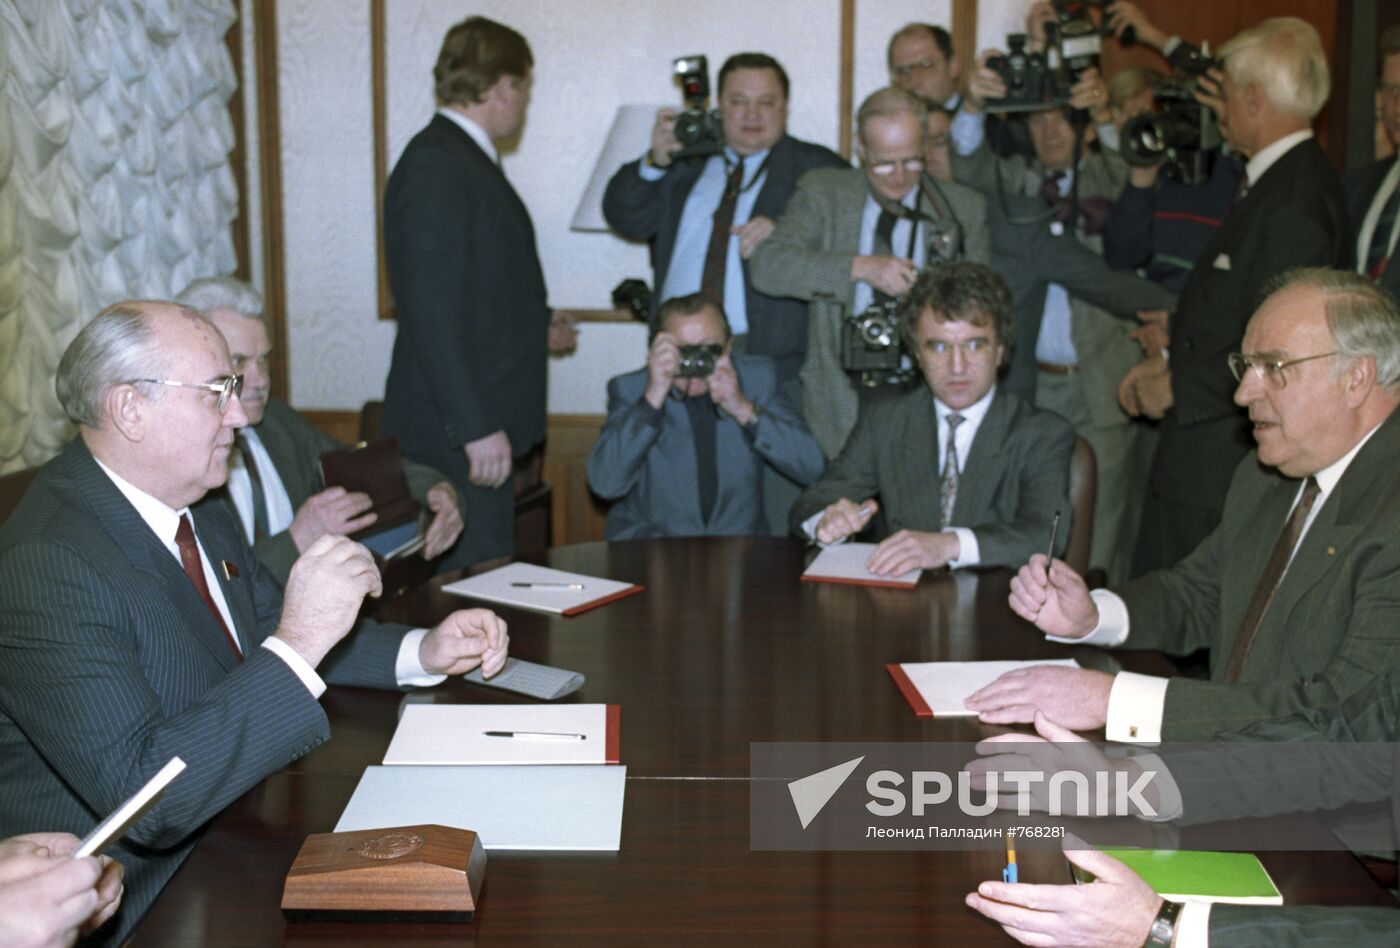 The Moscow visit of the FRG Federal Chancellor Helmut Kohl